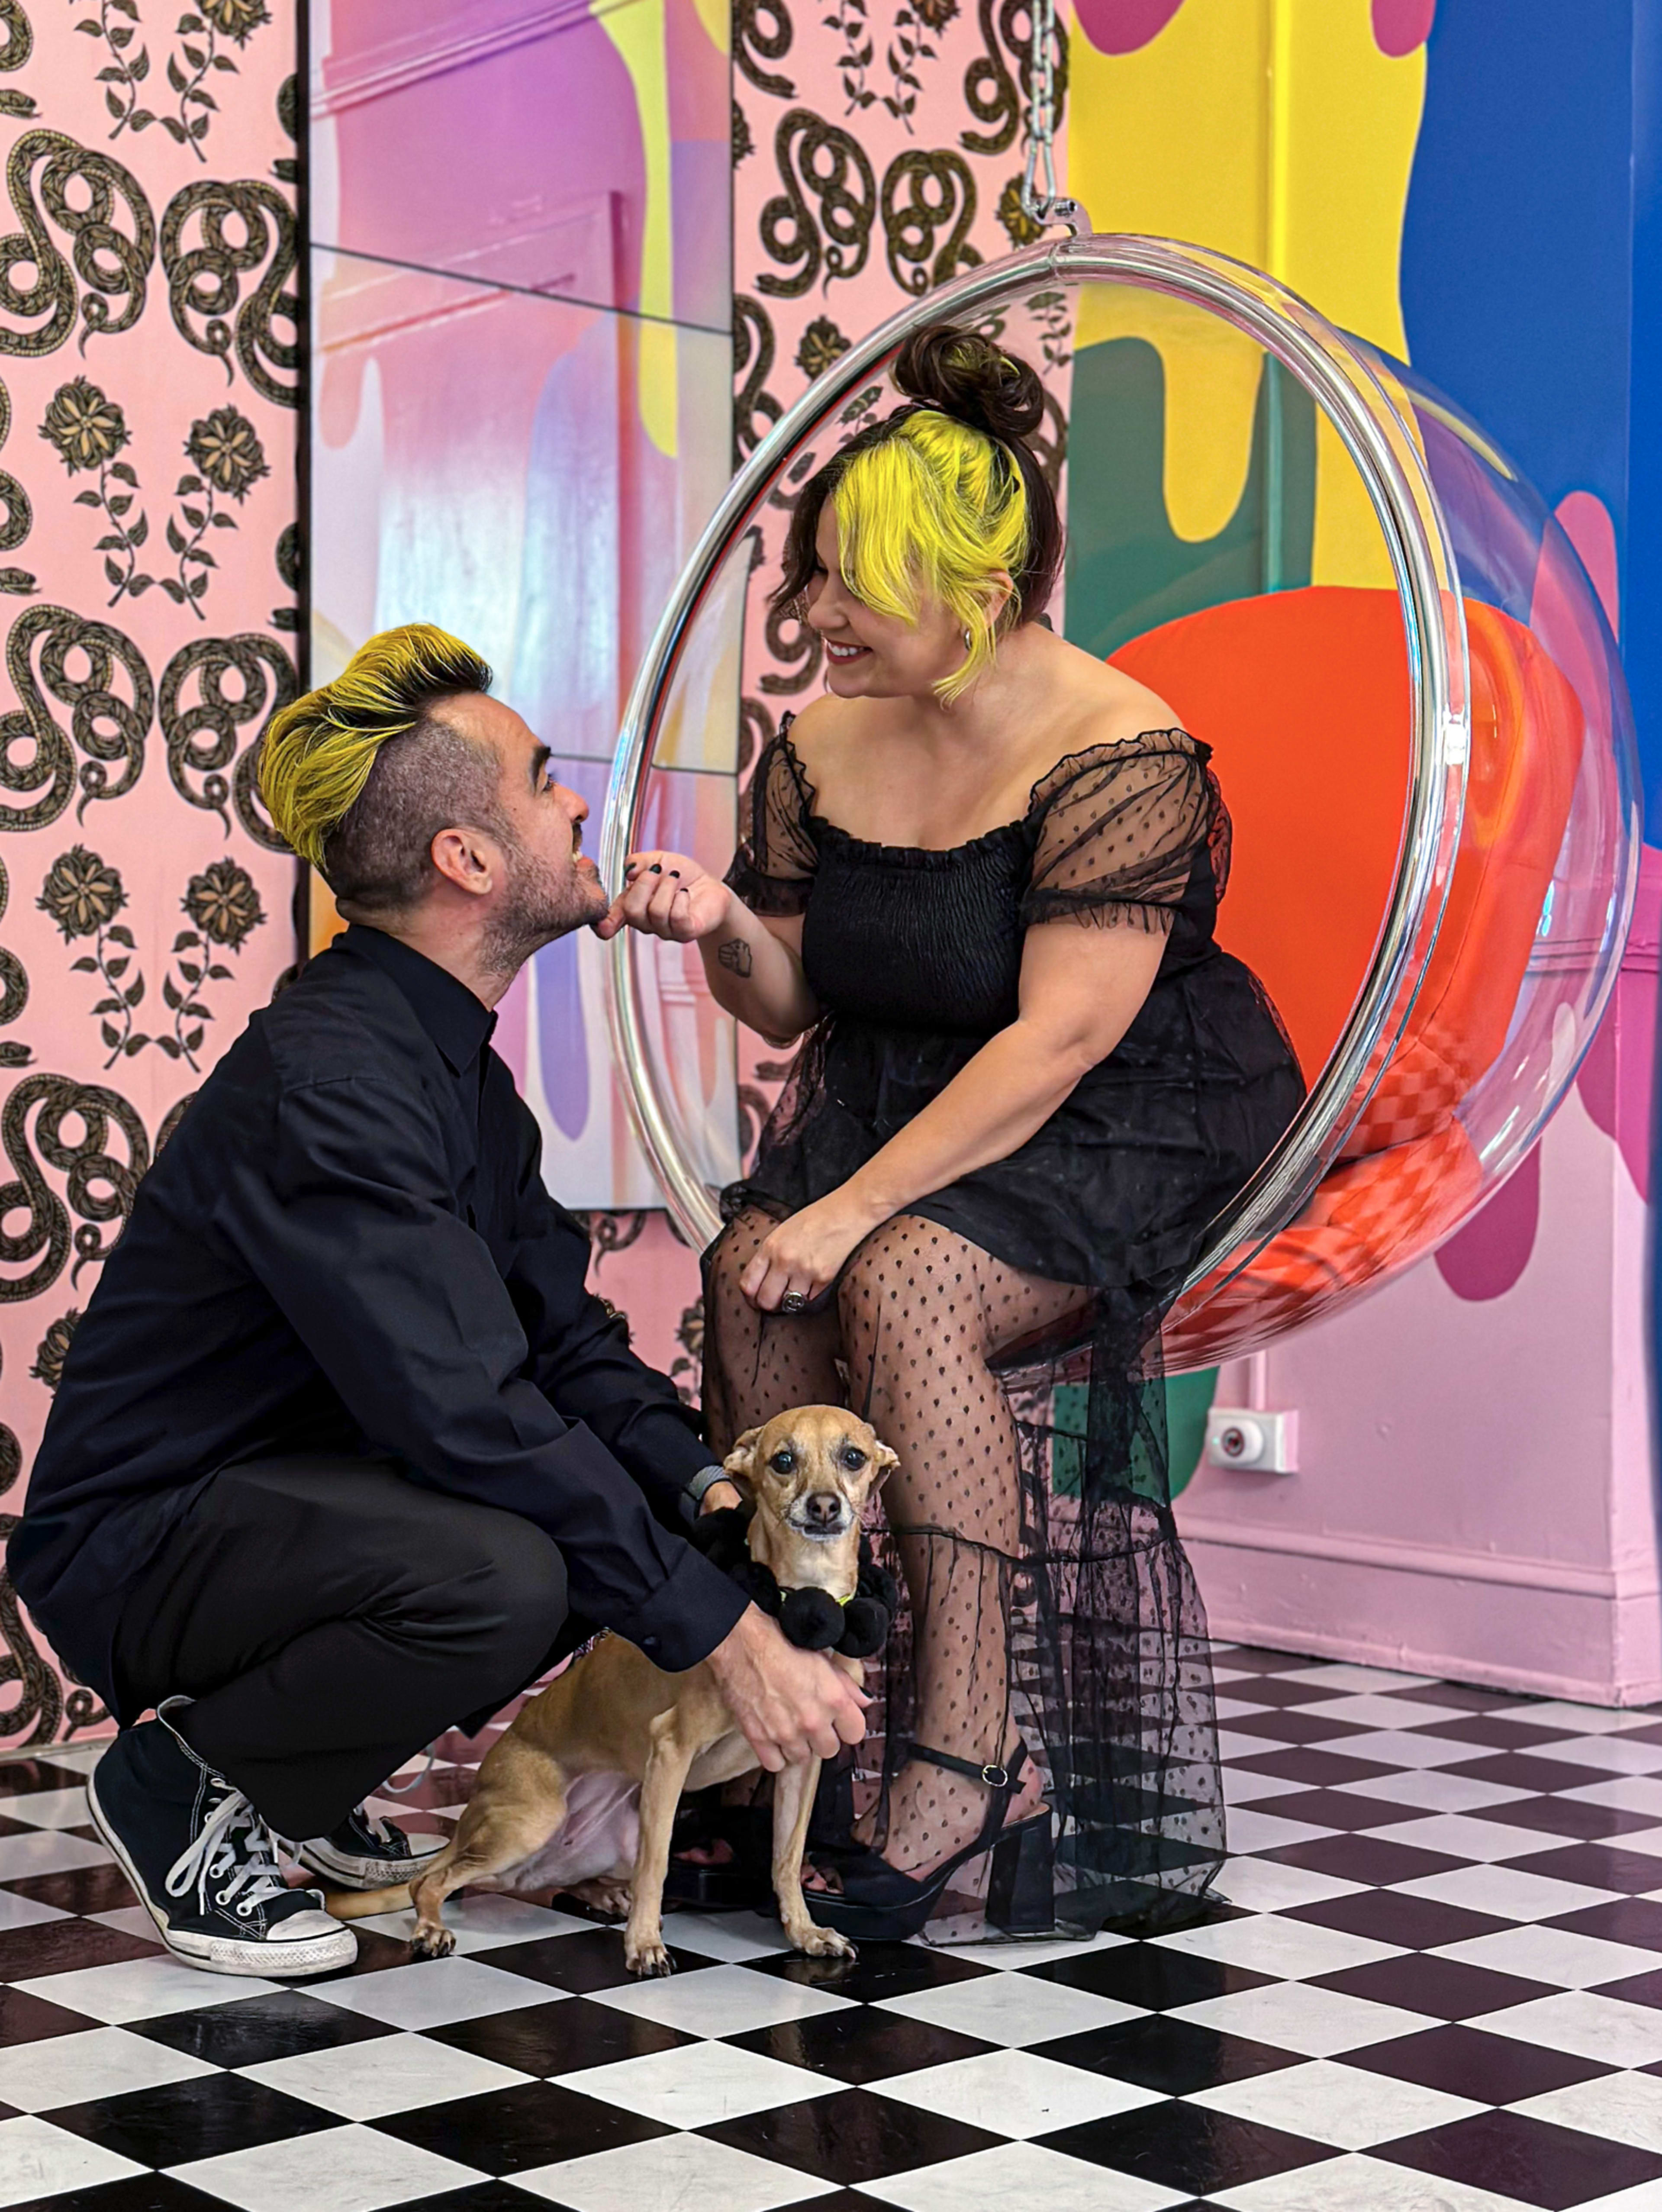 A couple sitting with their dog in an eclectic space during a photoshoot.